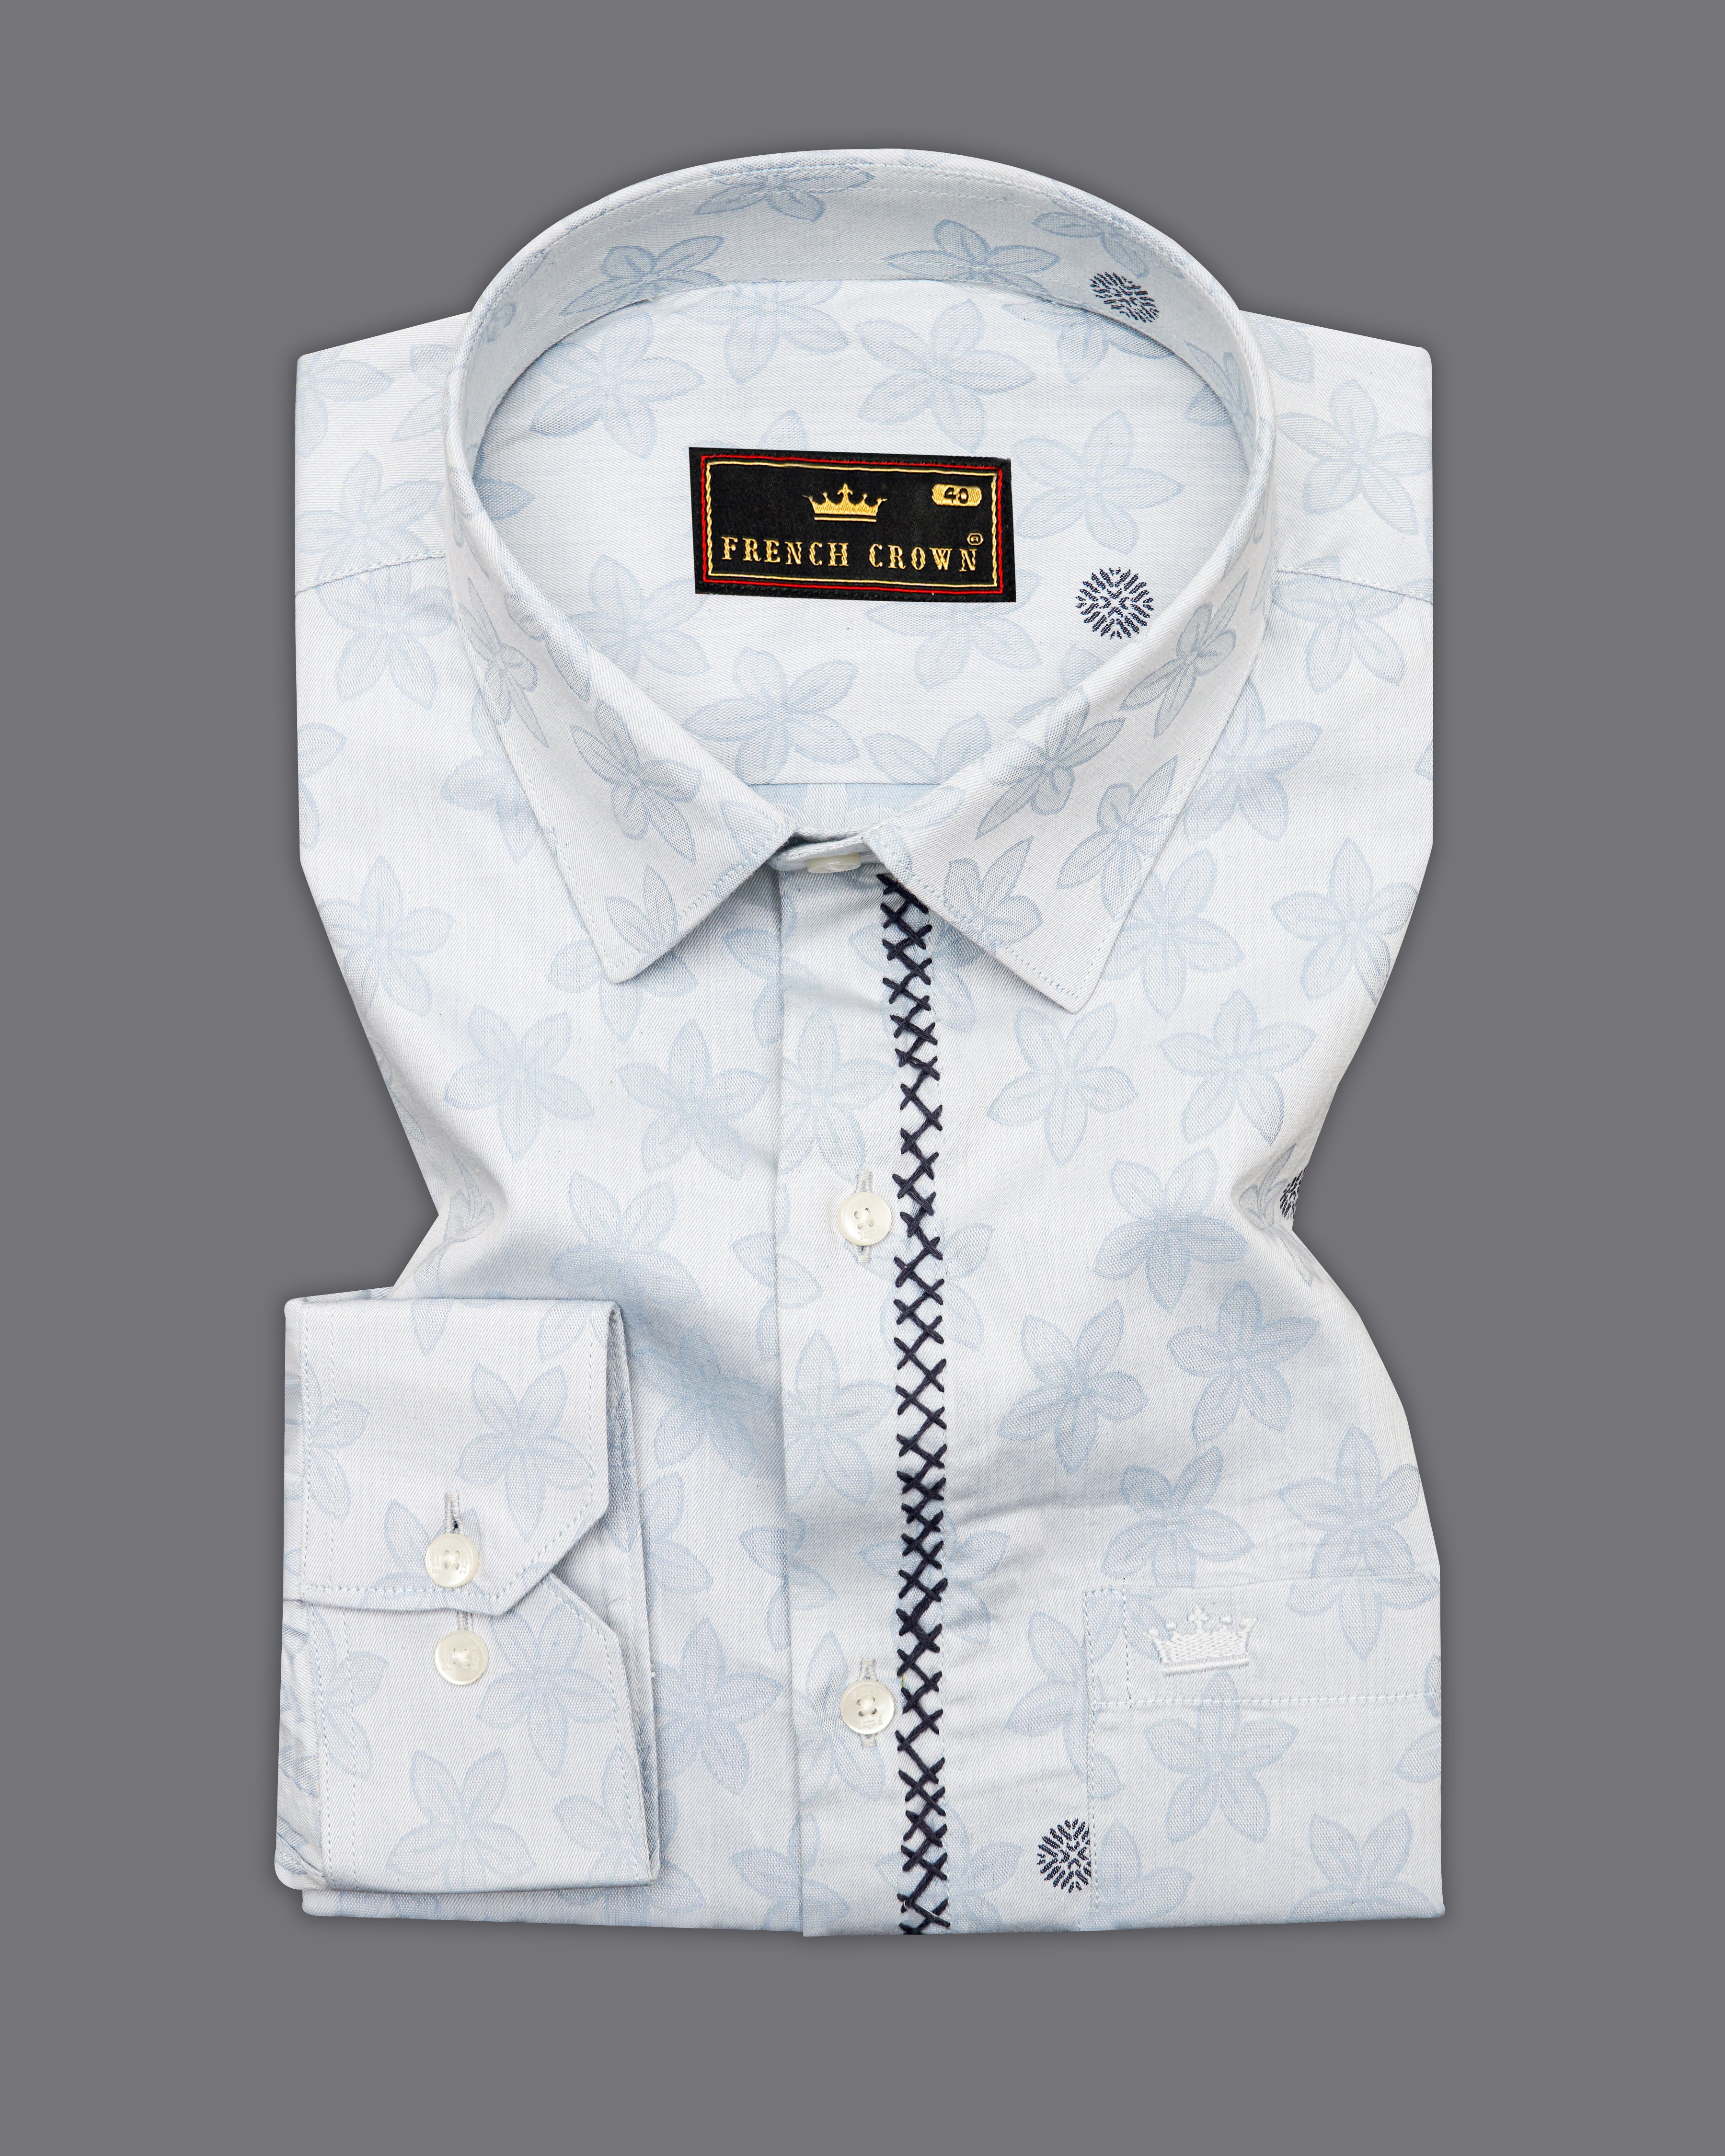 Magnolia with Spun Pearl Gray Hand Embroidered Jacquard Textured Designer Shirt 7762-EH083-38, 7762-EH083-H-38, 7762-EH083-39, 7762-EH083-H-39, 7762-EH083-40, 7762-EH083-H-40, 7762-EH083-42, 7762-EH083-H-42, 7762-EH083-44, 7762-EH083-H-44, 7762-EH083-46, 7762-EH083-H-46, 7762-EH083-48, 7762-EH083-H-48, 7762-EH083-50, 7762-EH083-H-50, 7762-EH083-52, 7762-EH083-H-52